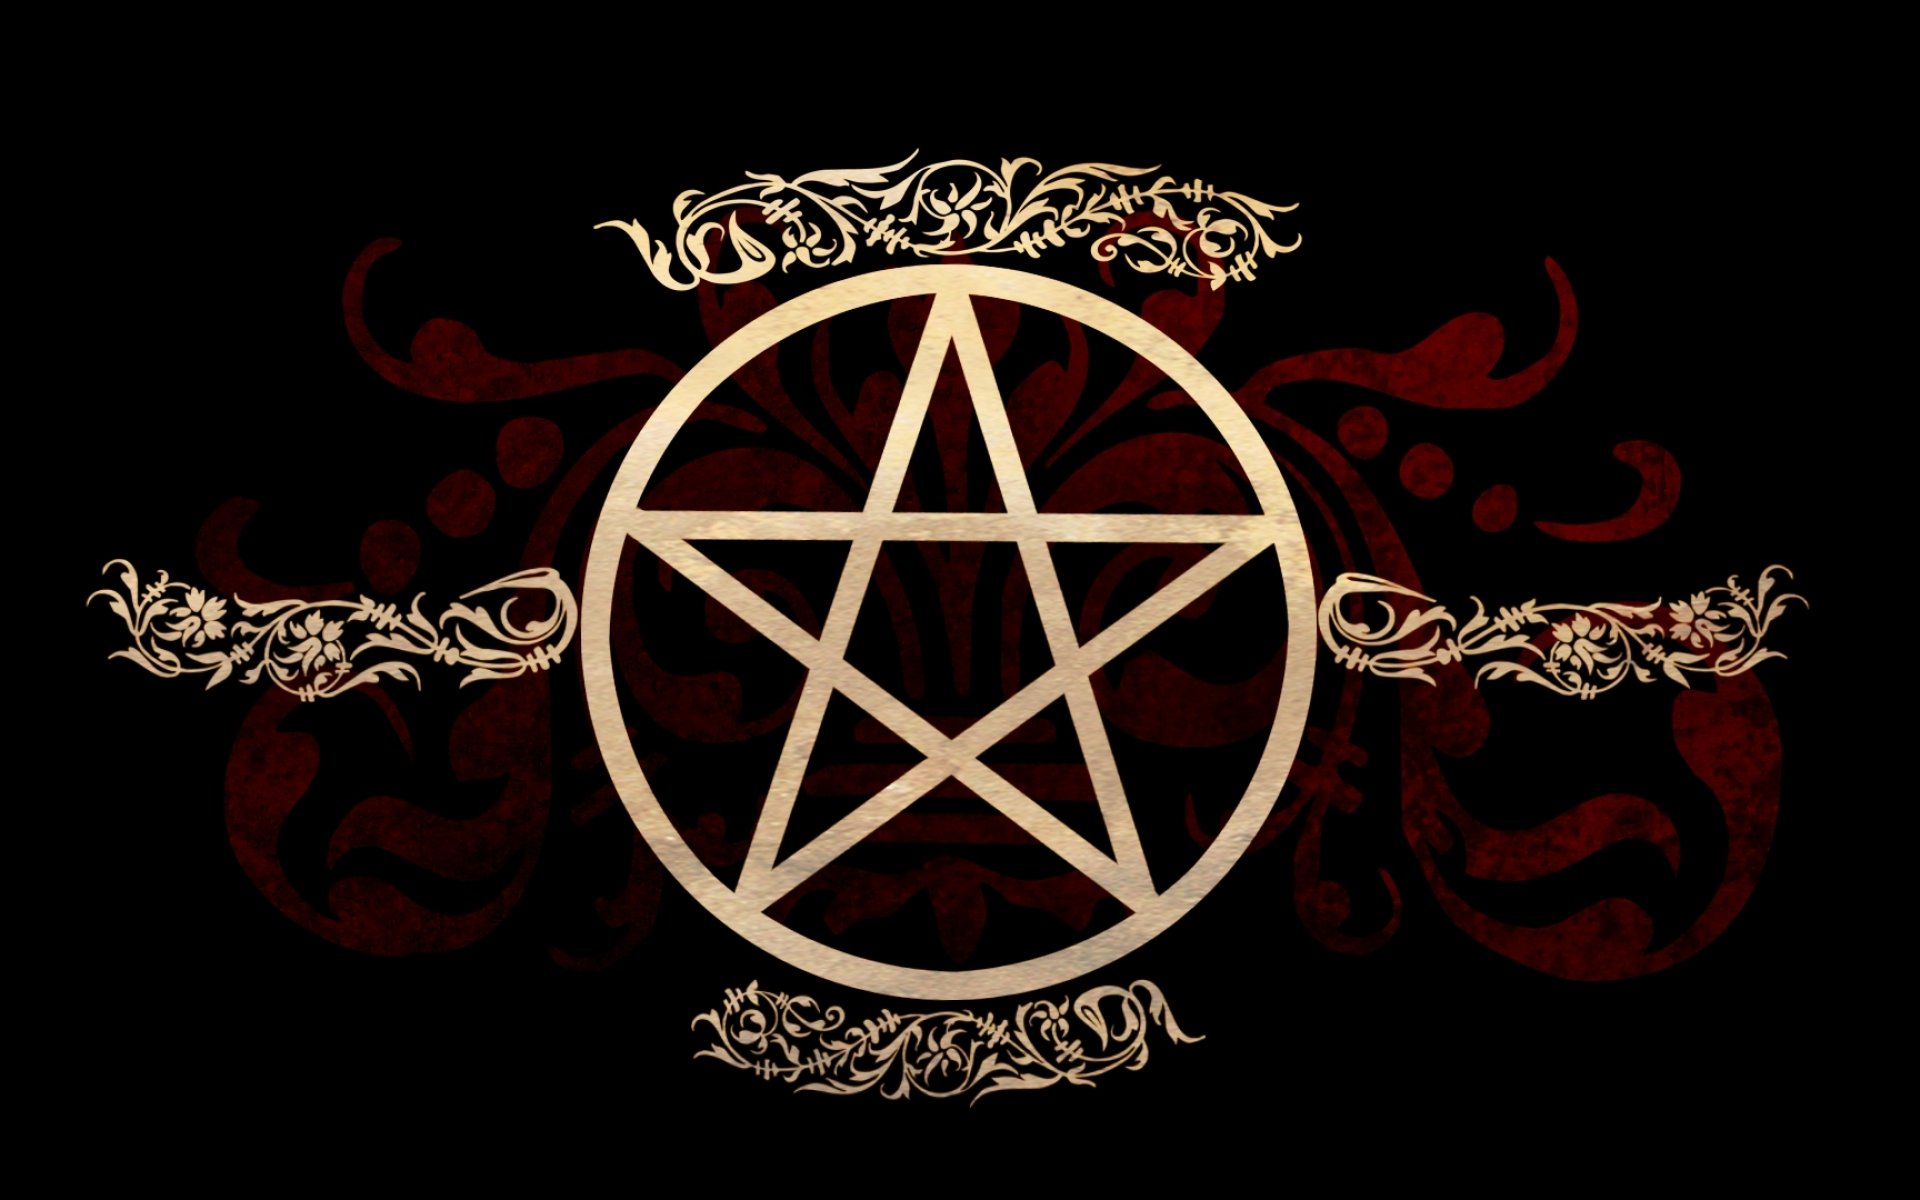 Dark Evil Occult Pagan Witch Wiccan Wicca Wallpaper HD